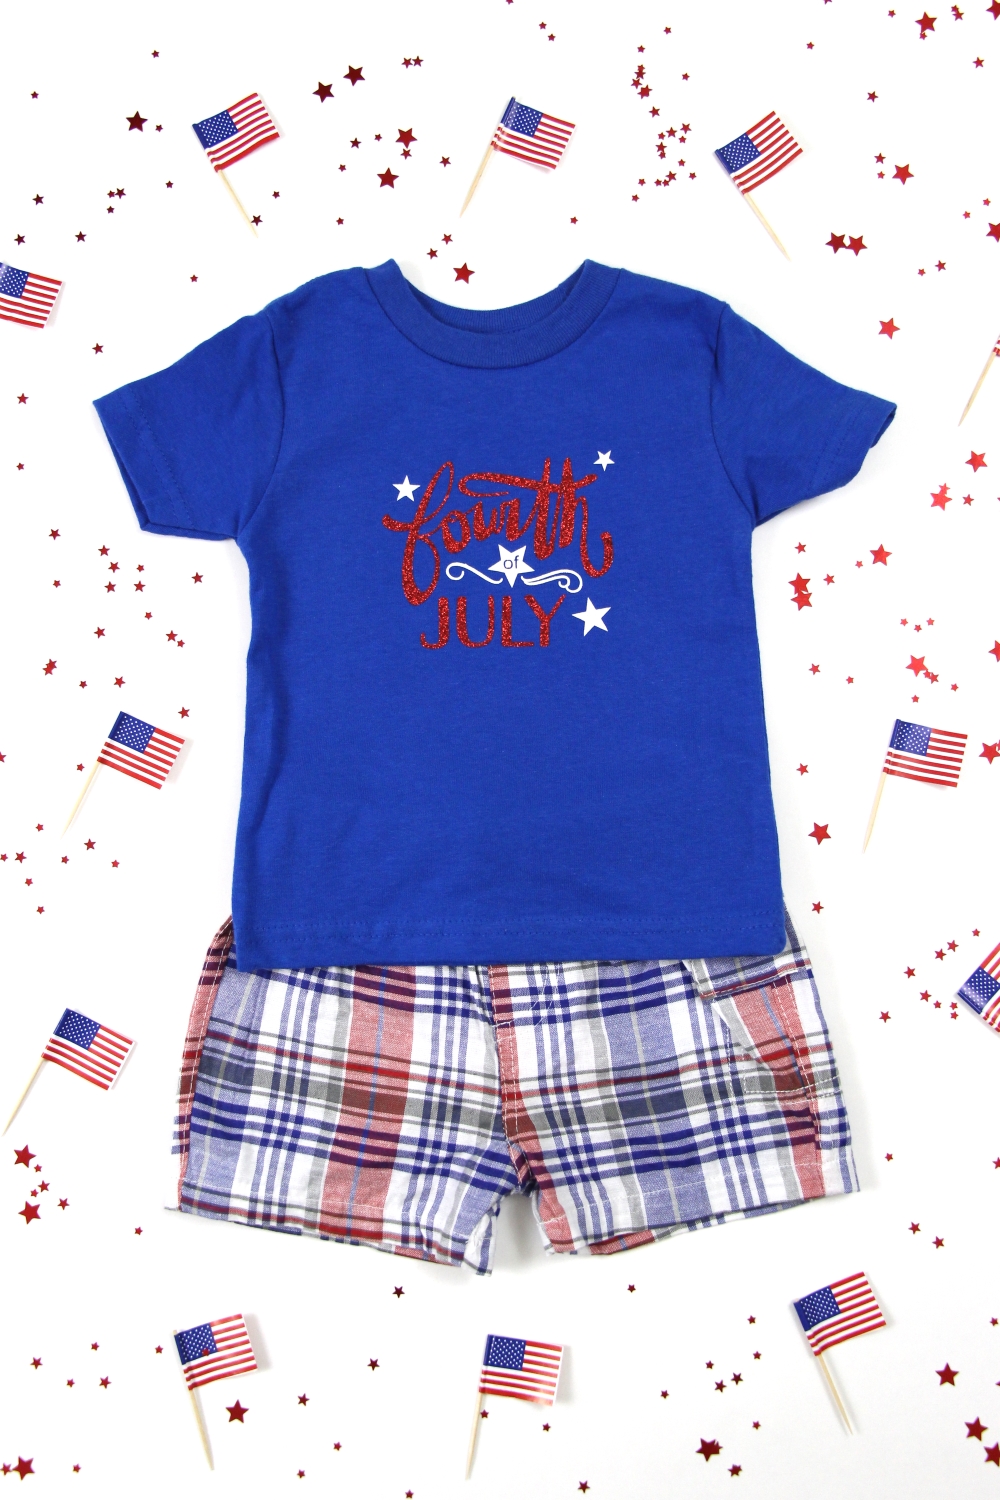 Create your own DIY 4th of July T-shirt with Heat Transfer Vinyl. No more running to the store last minute; just cut, iron, and go. Click here to see how to make this dual color design that’s perfect for celebrating Independence Day.